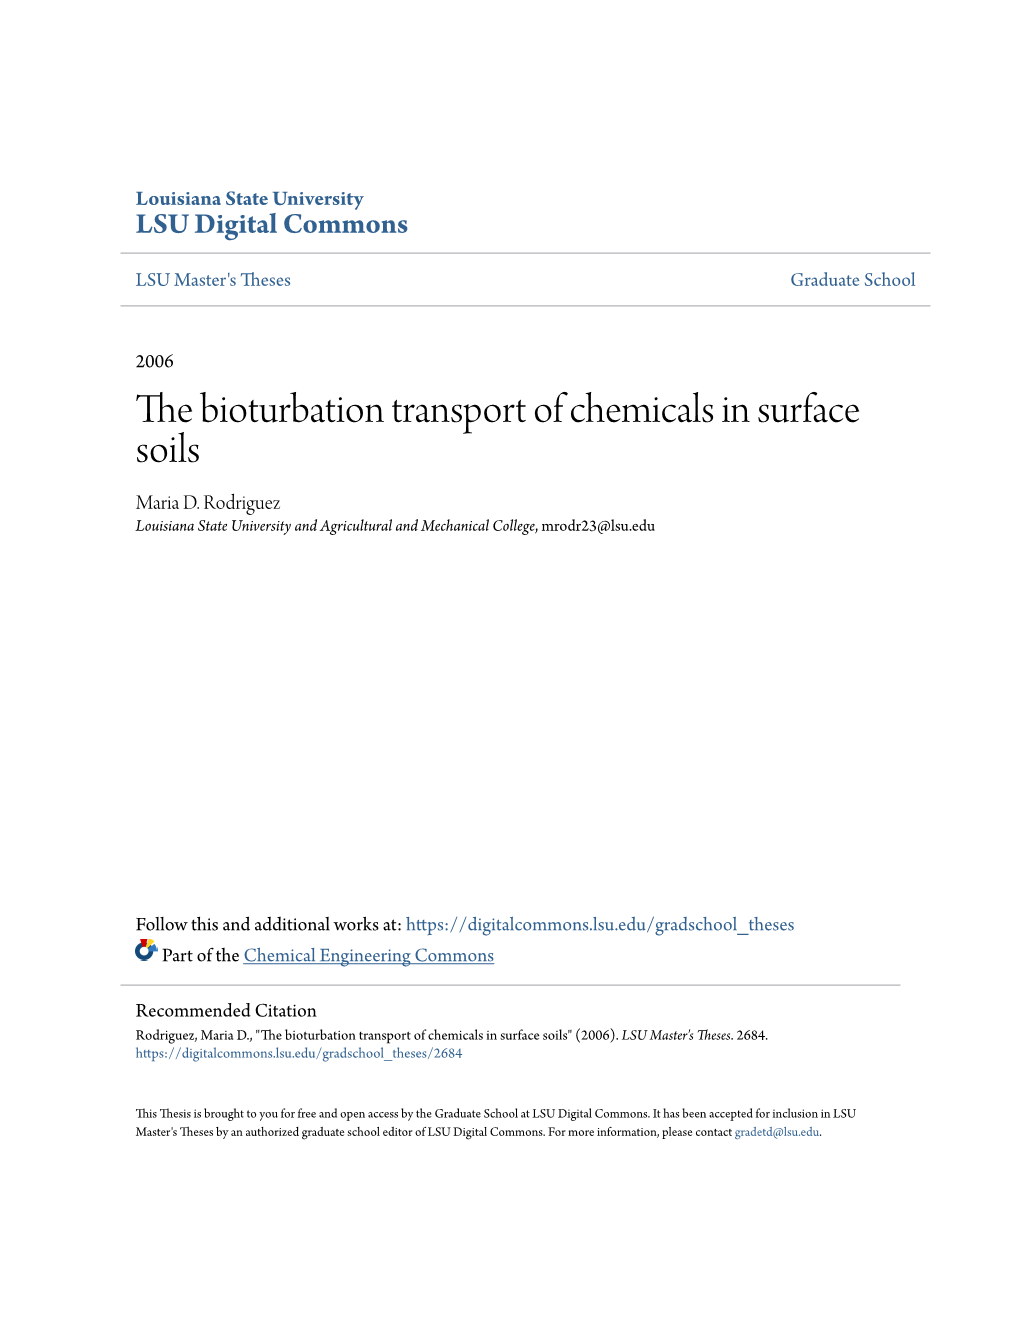 The Bioturbation Transport of Chemicals in Surface Soils Maria D